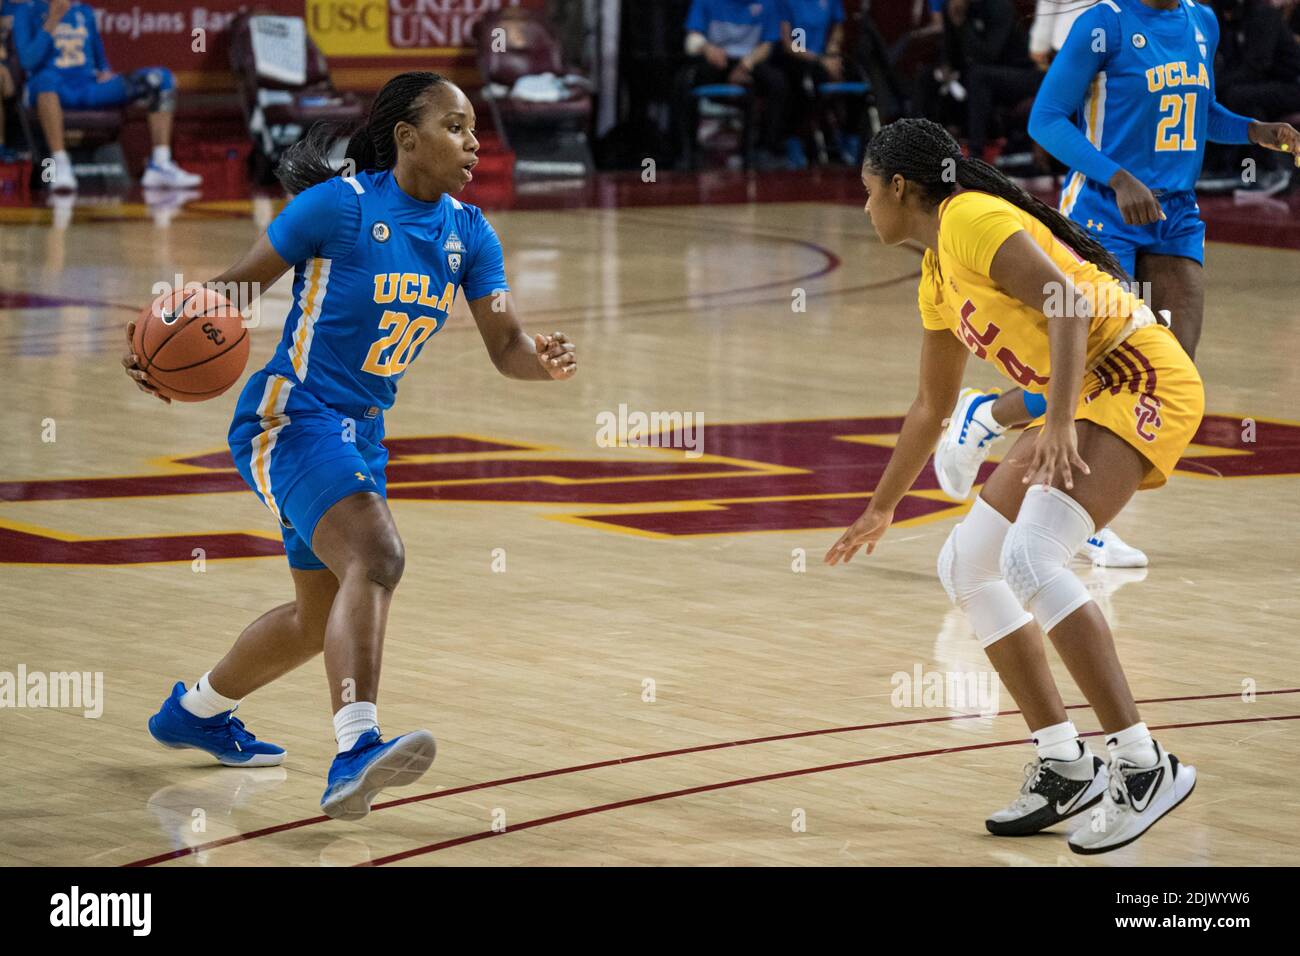 UCLA Bruins guard Charisma Osborne (20) is defended by Southern California Trojans guard Desire Caldwell (24) during an NCAA college basketball game, Stock Photo